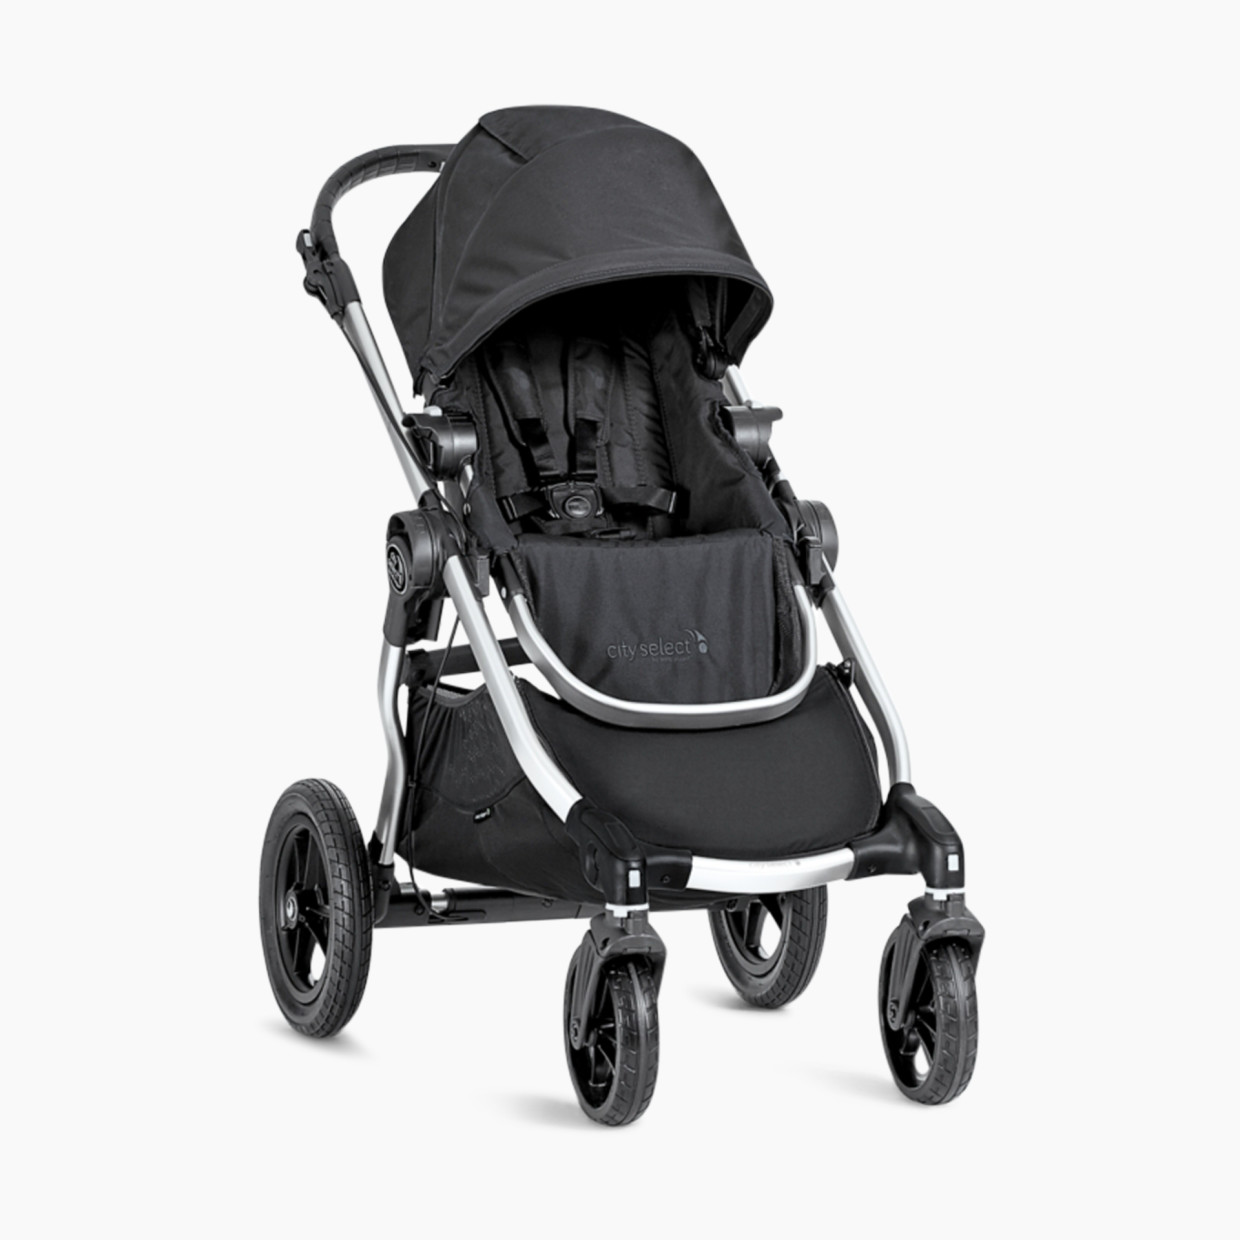 Baby Jogger 2018 City Select Stroller - Onyx.